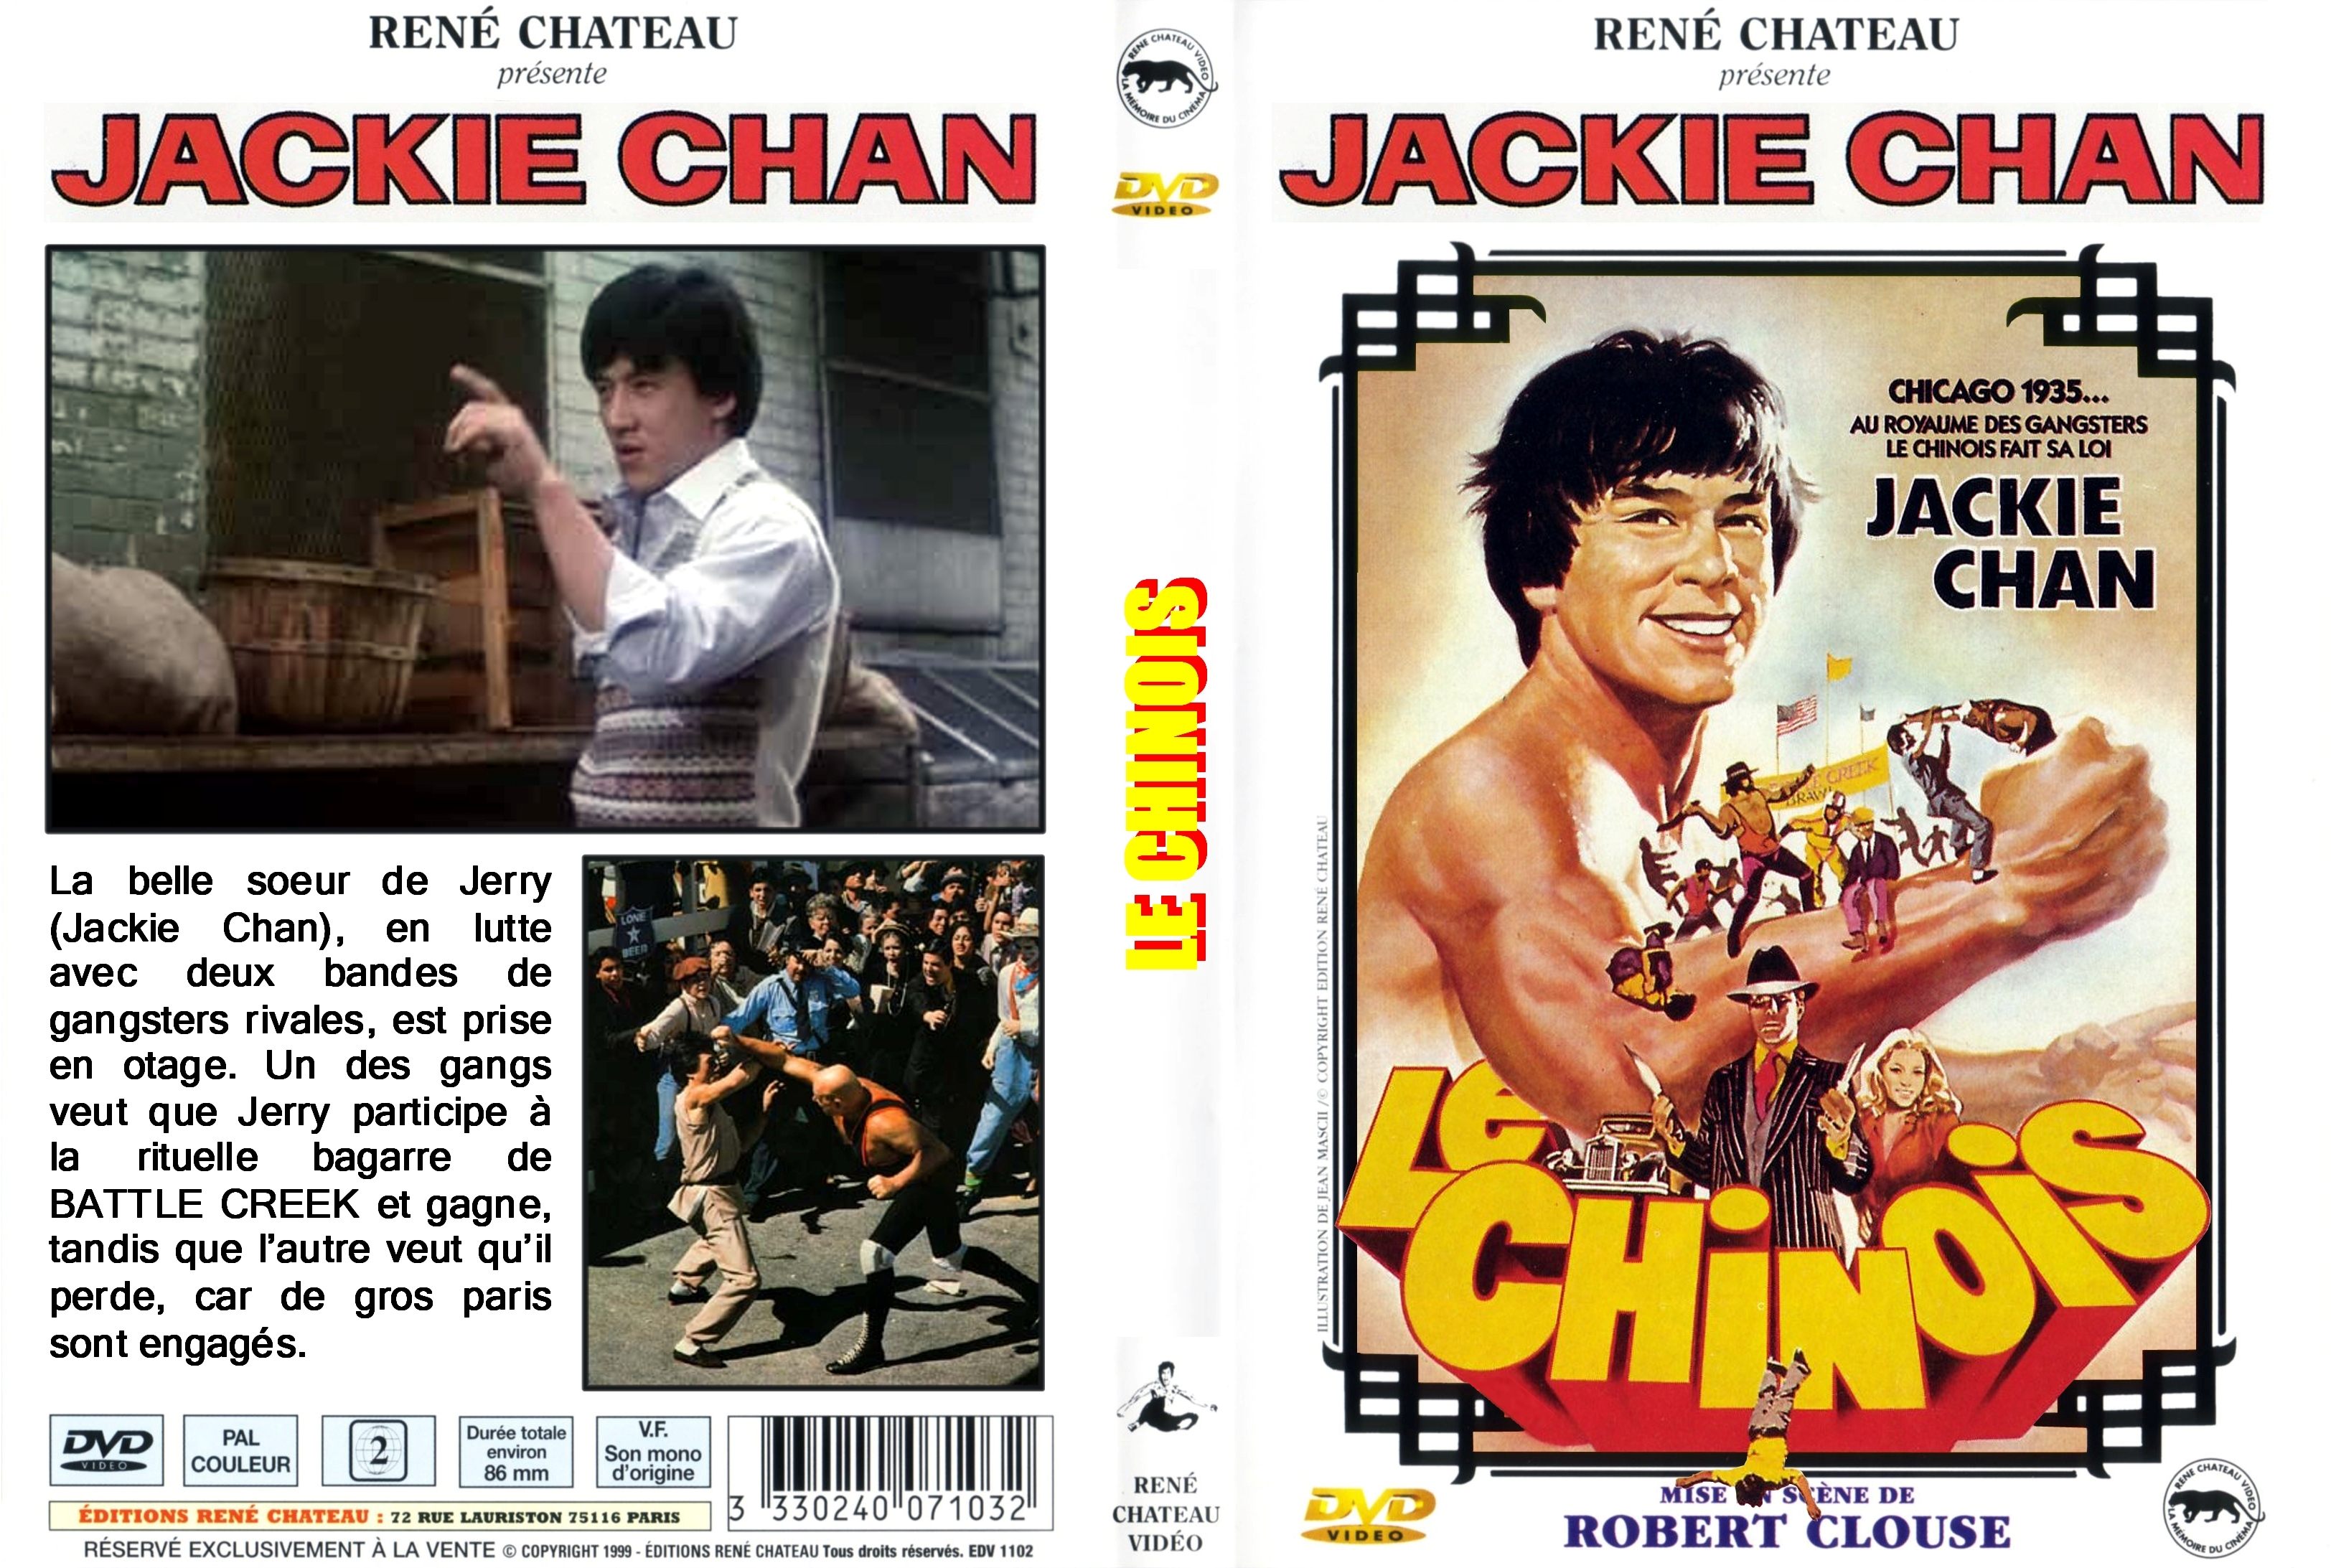 Jaquette DVD Le chinois custom v2